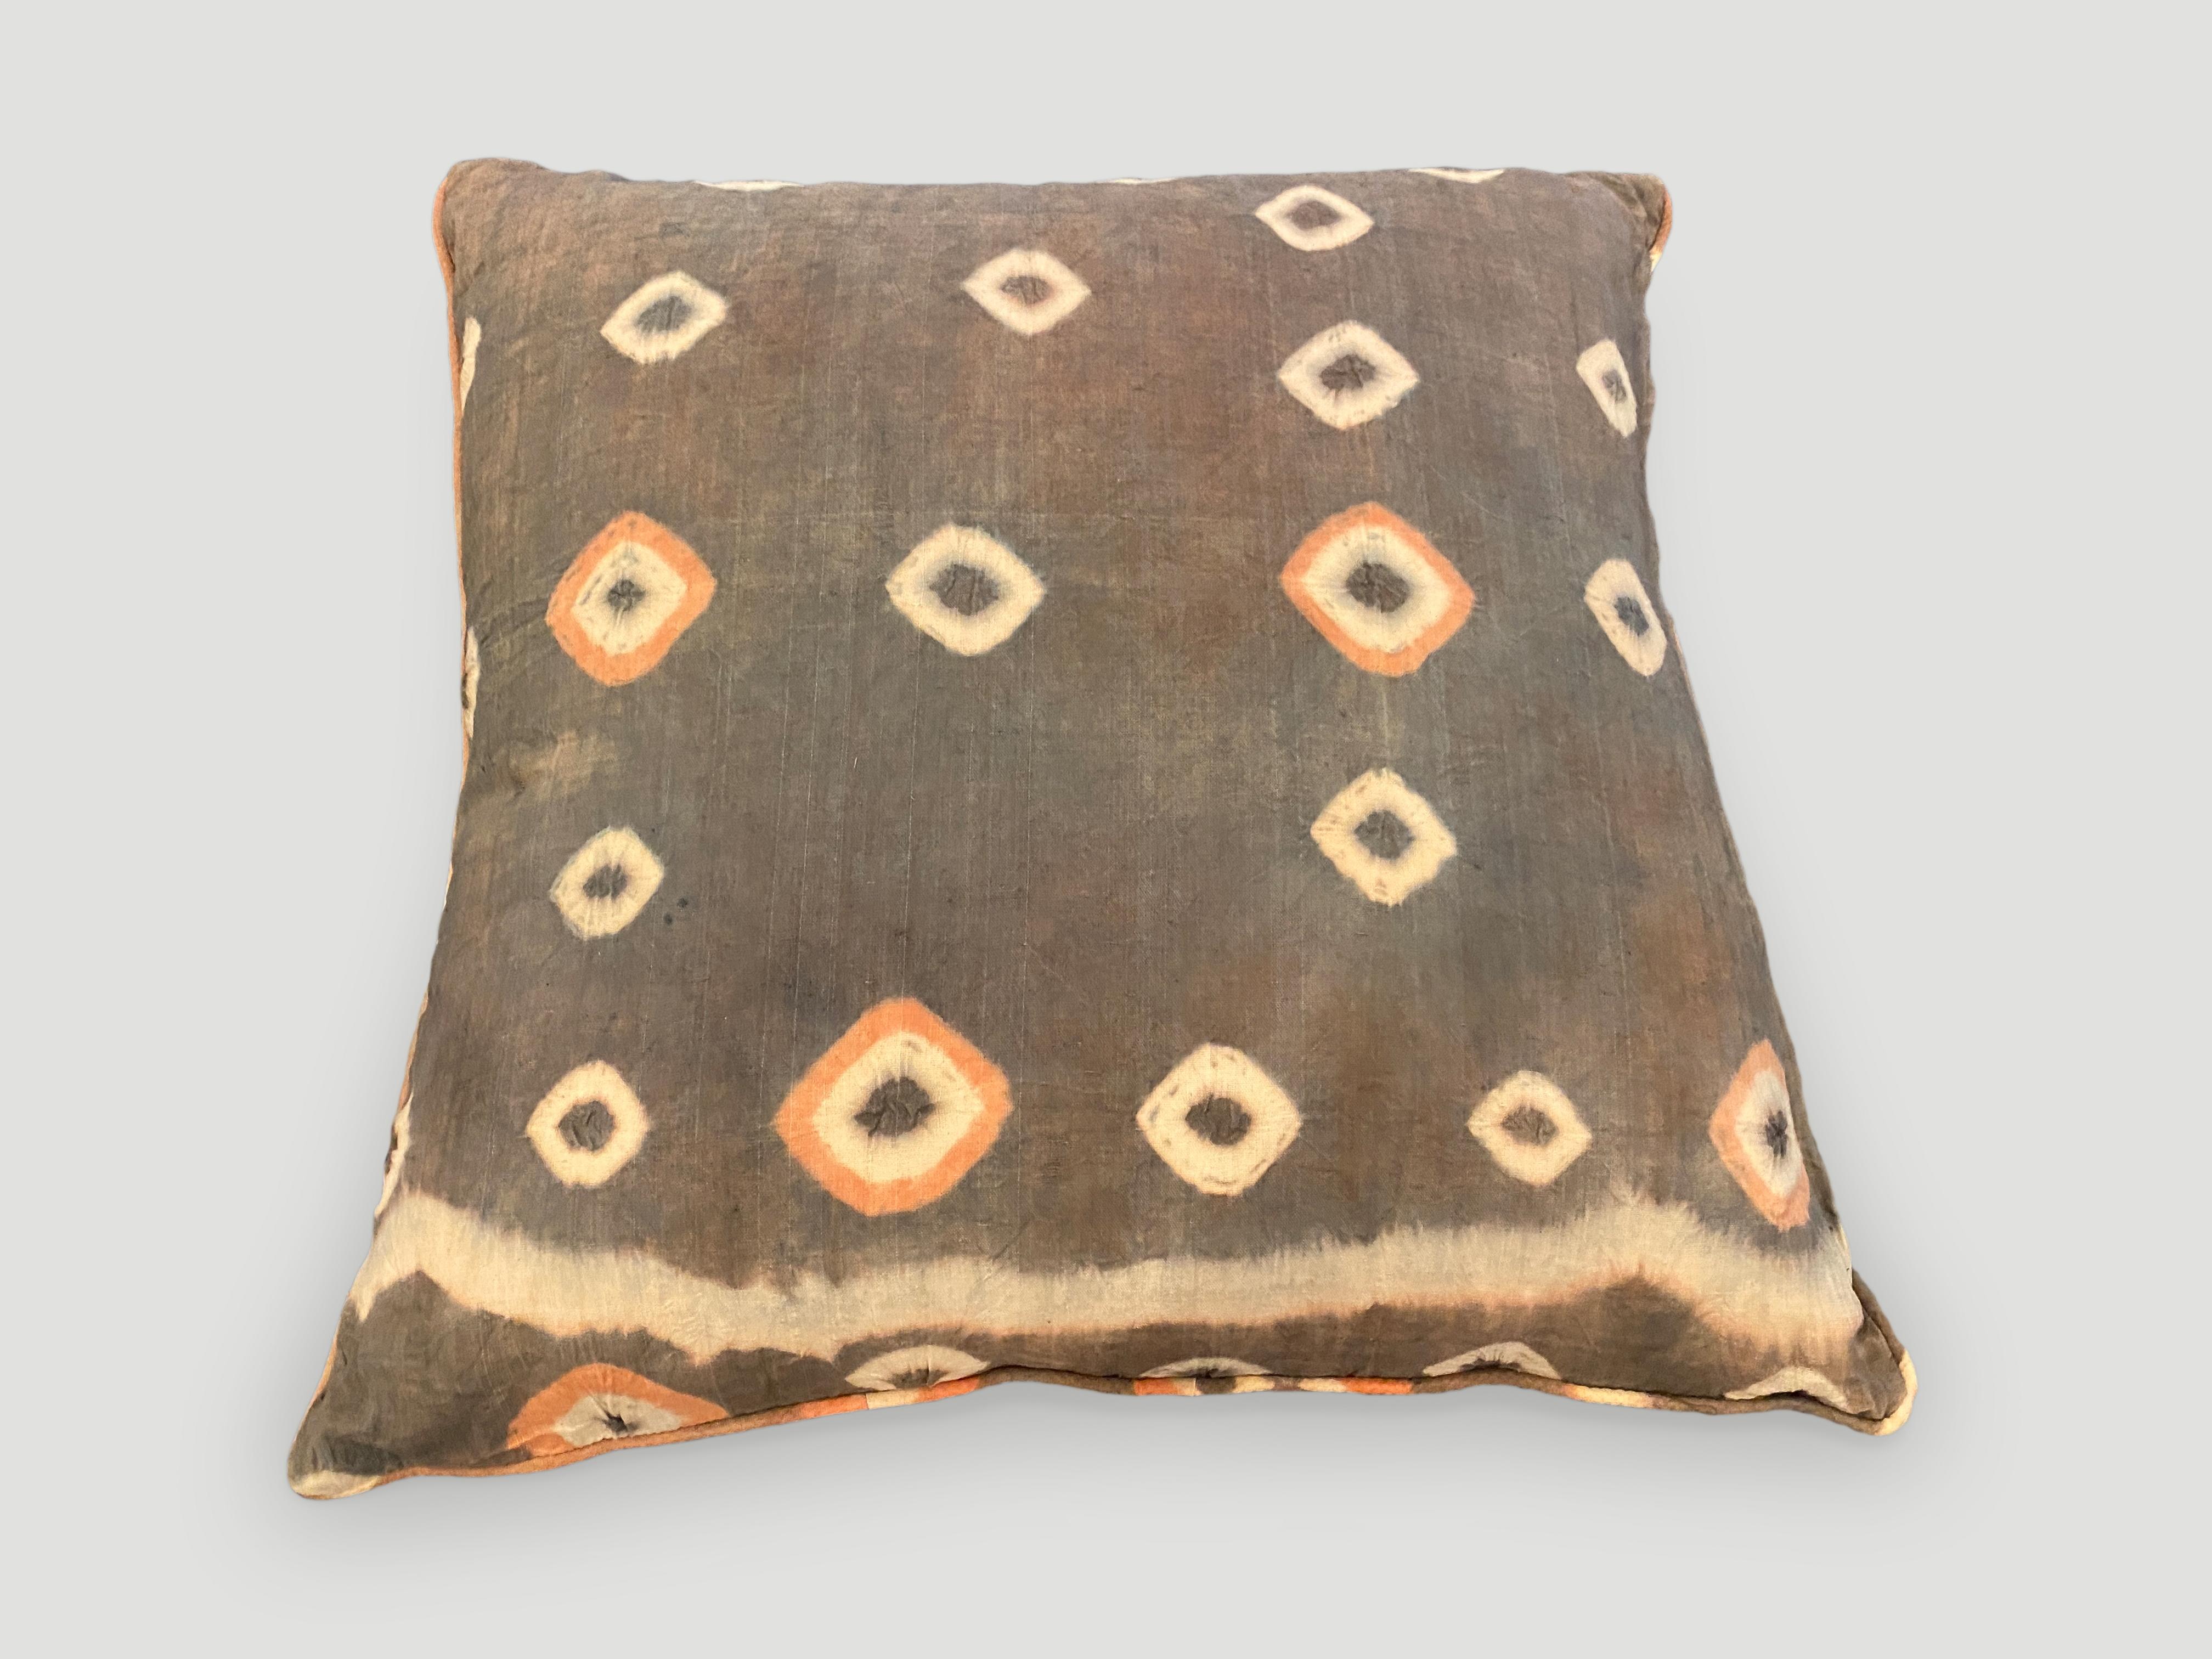 Beautiful antique textiles found in Toraja Land, South Sulawesi, are made into pillows with piping and concealed zippers. Double backed with stunning contrasting colors. Inserts included. A blend of cotton and linen. 

Andrianna Shamaris. The